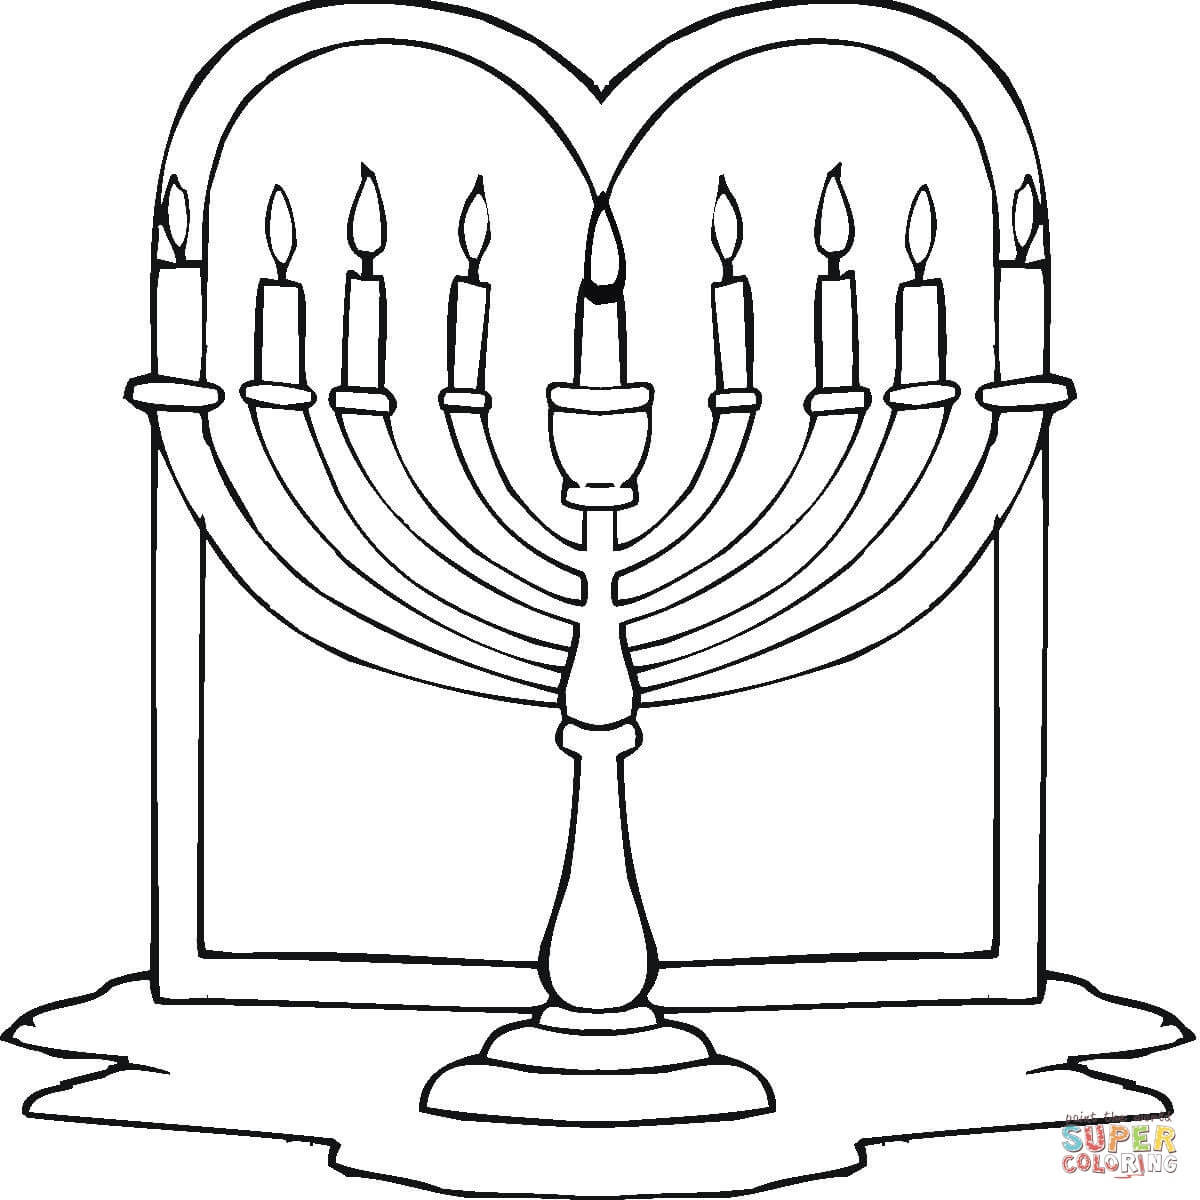 Shavuot coloring page | Free Printable Coloring Pages